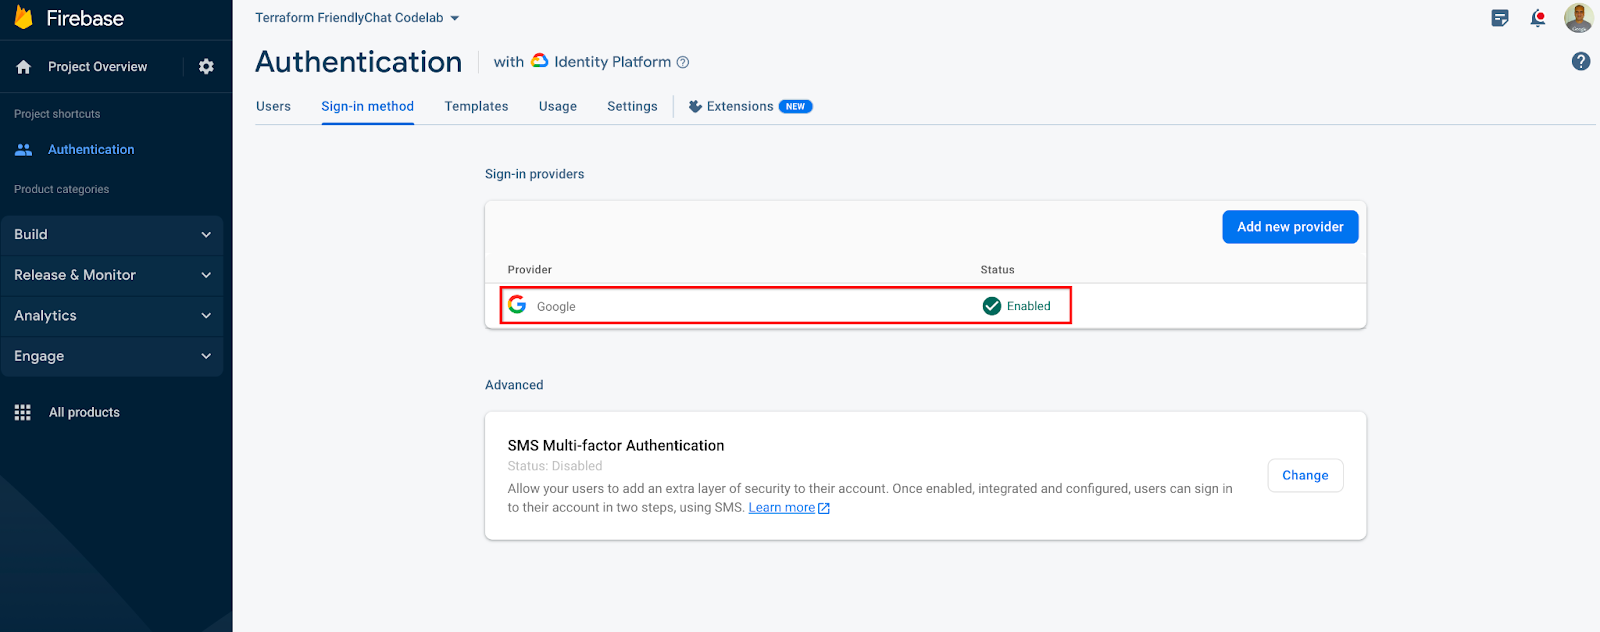 Firebase console Authentication page: Google sign-in enabled